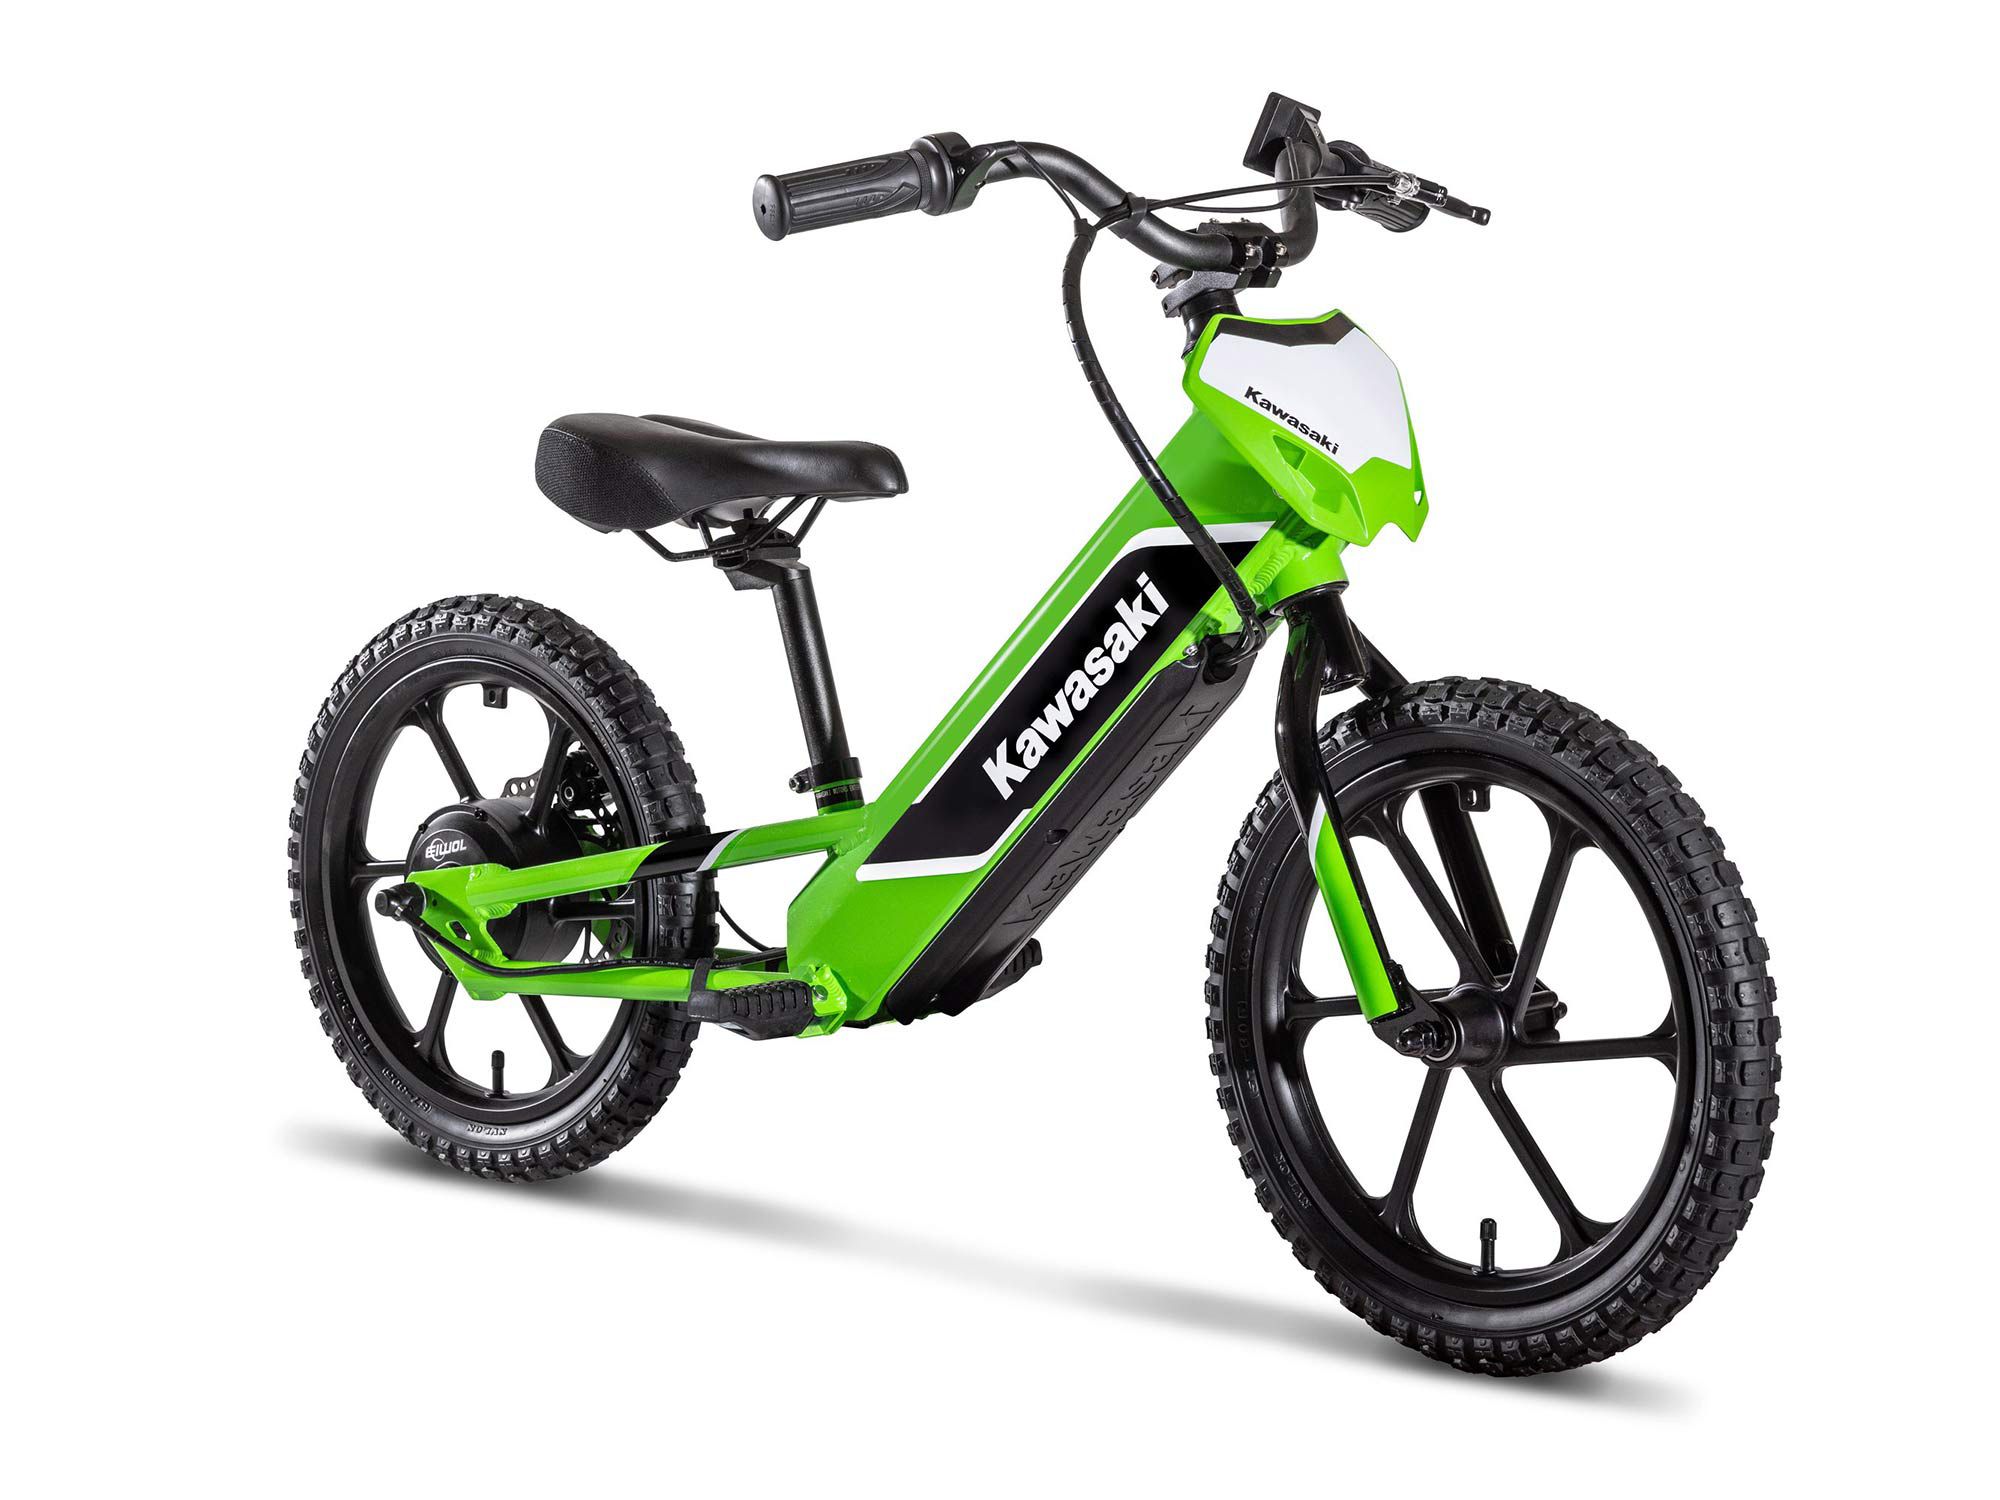 The Elektrode has KX-inspired styling with its number plate, lime green paint, and motocross-inspired graphics.